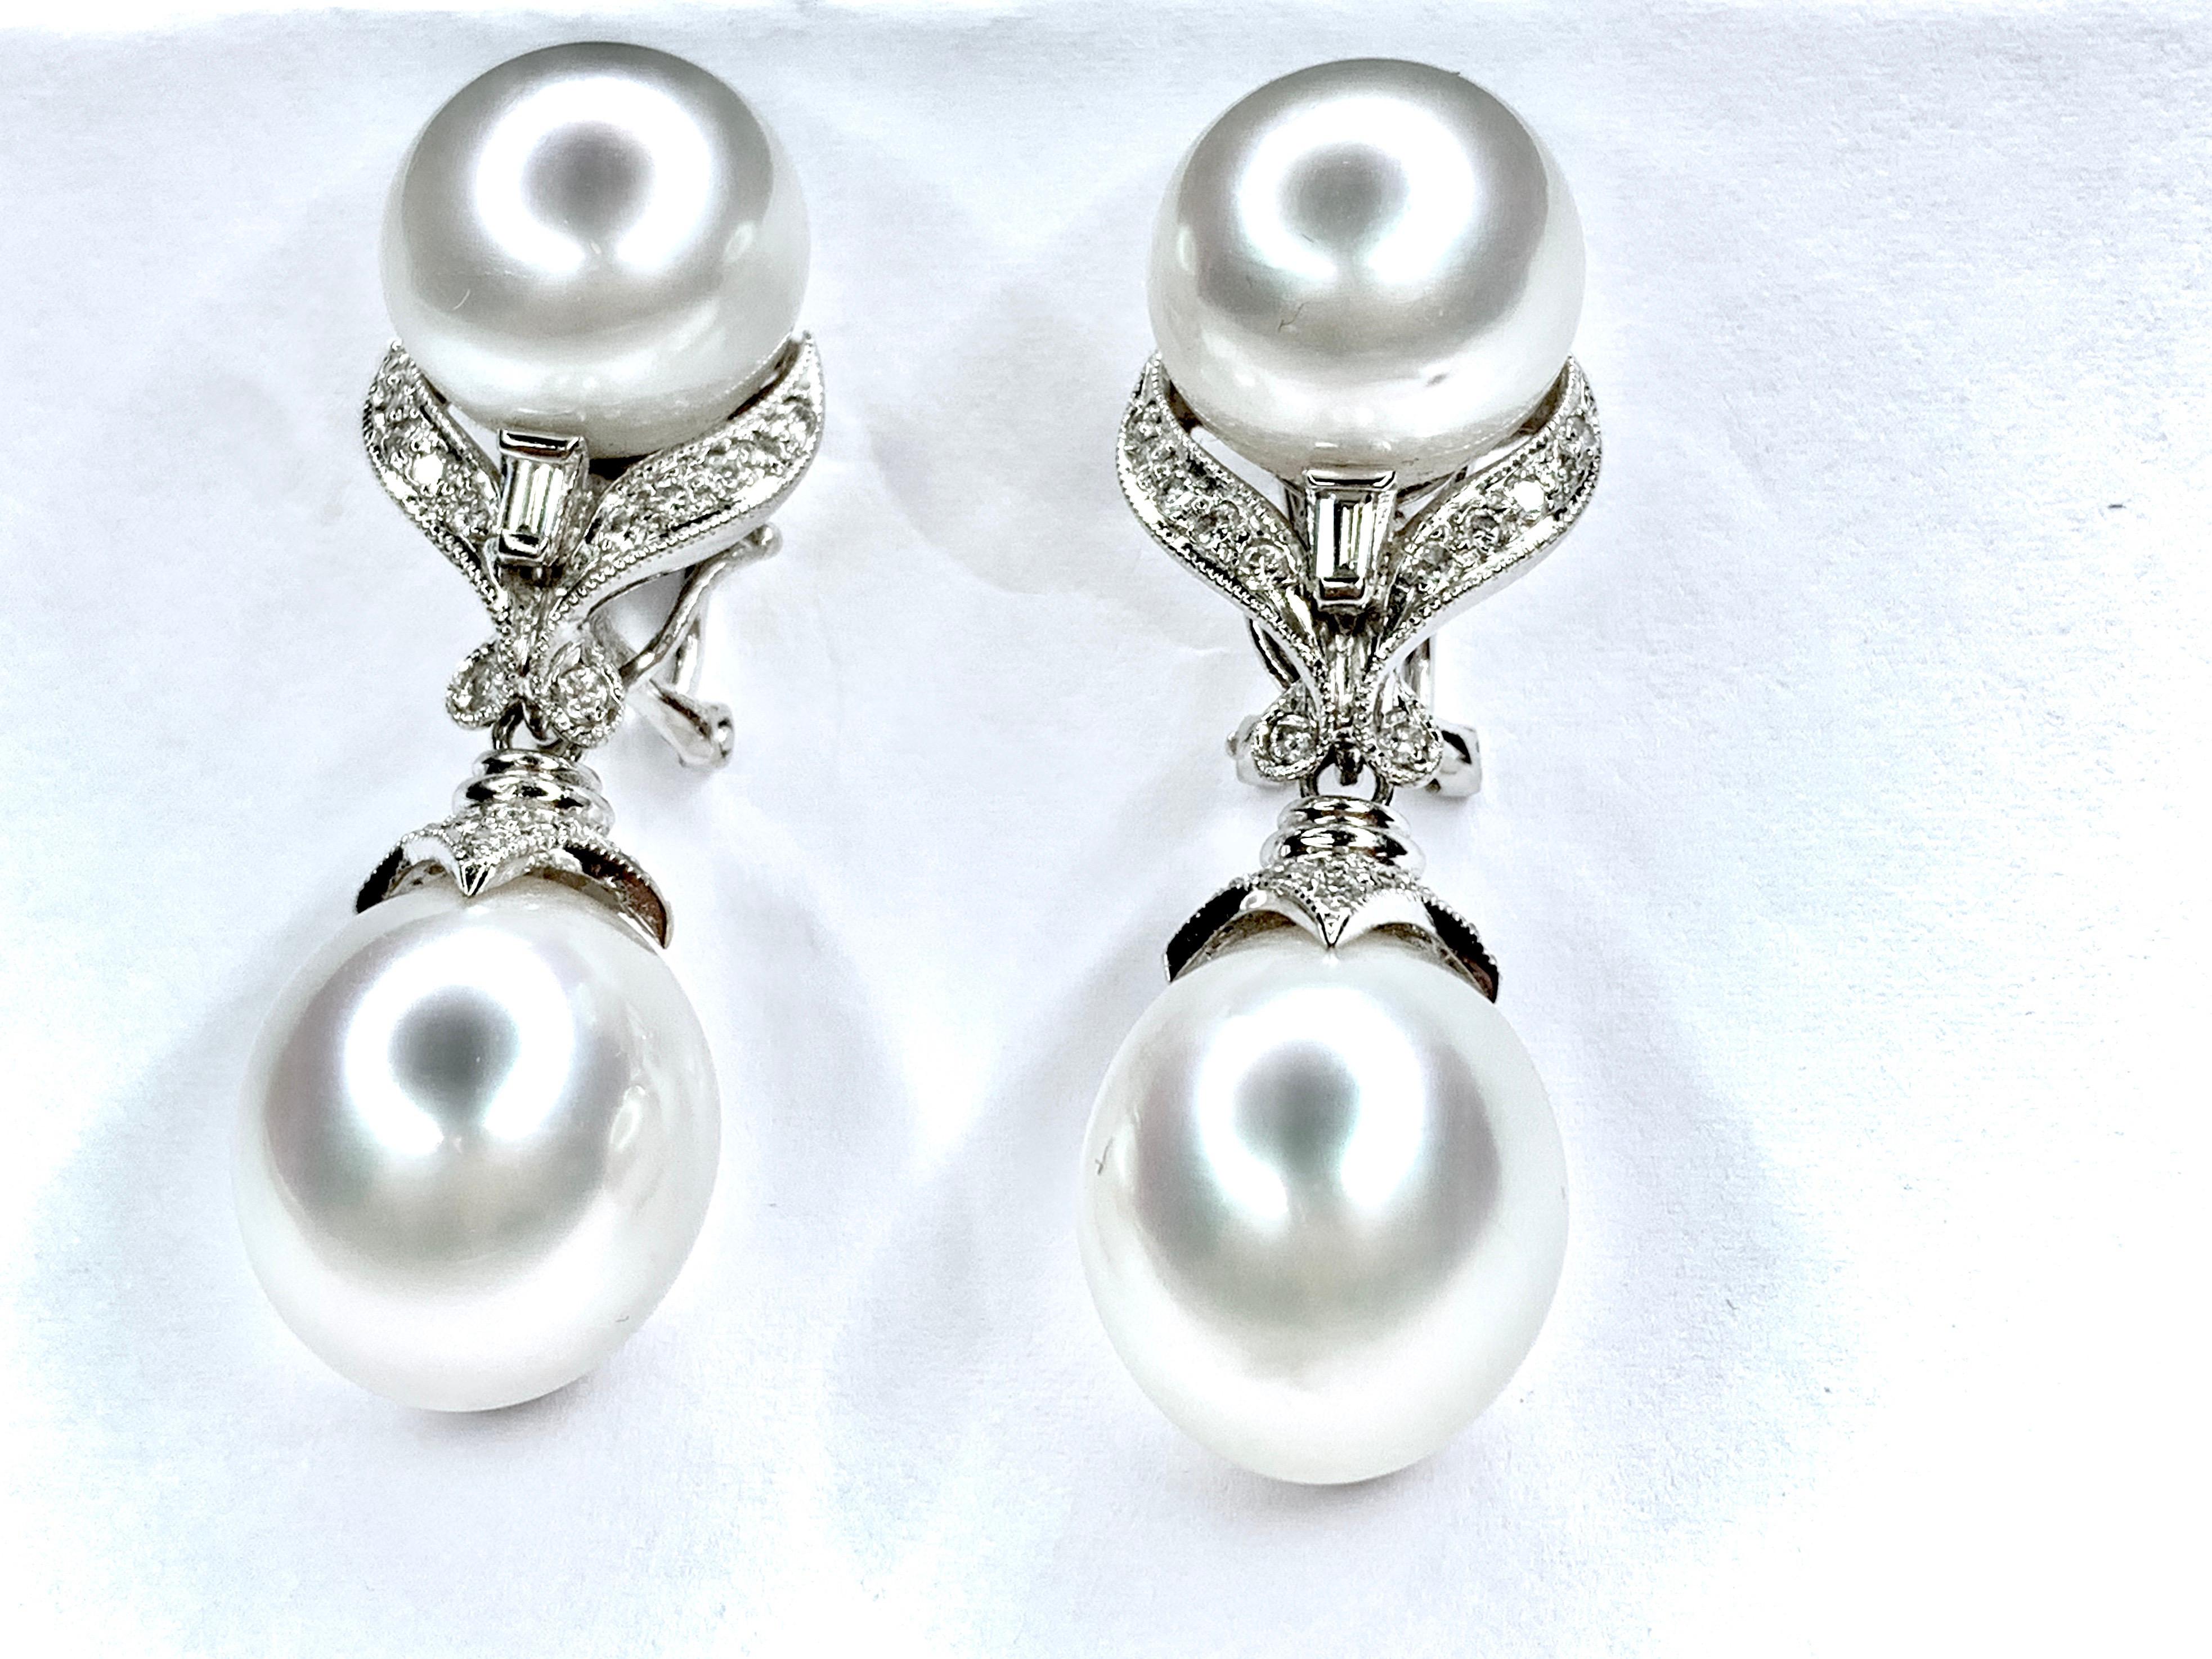 Round Cut Gemolithos Pair of Button & Pear Shaped Australian Cultured Pearl & Dia Earrings